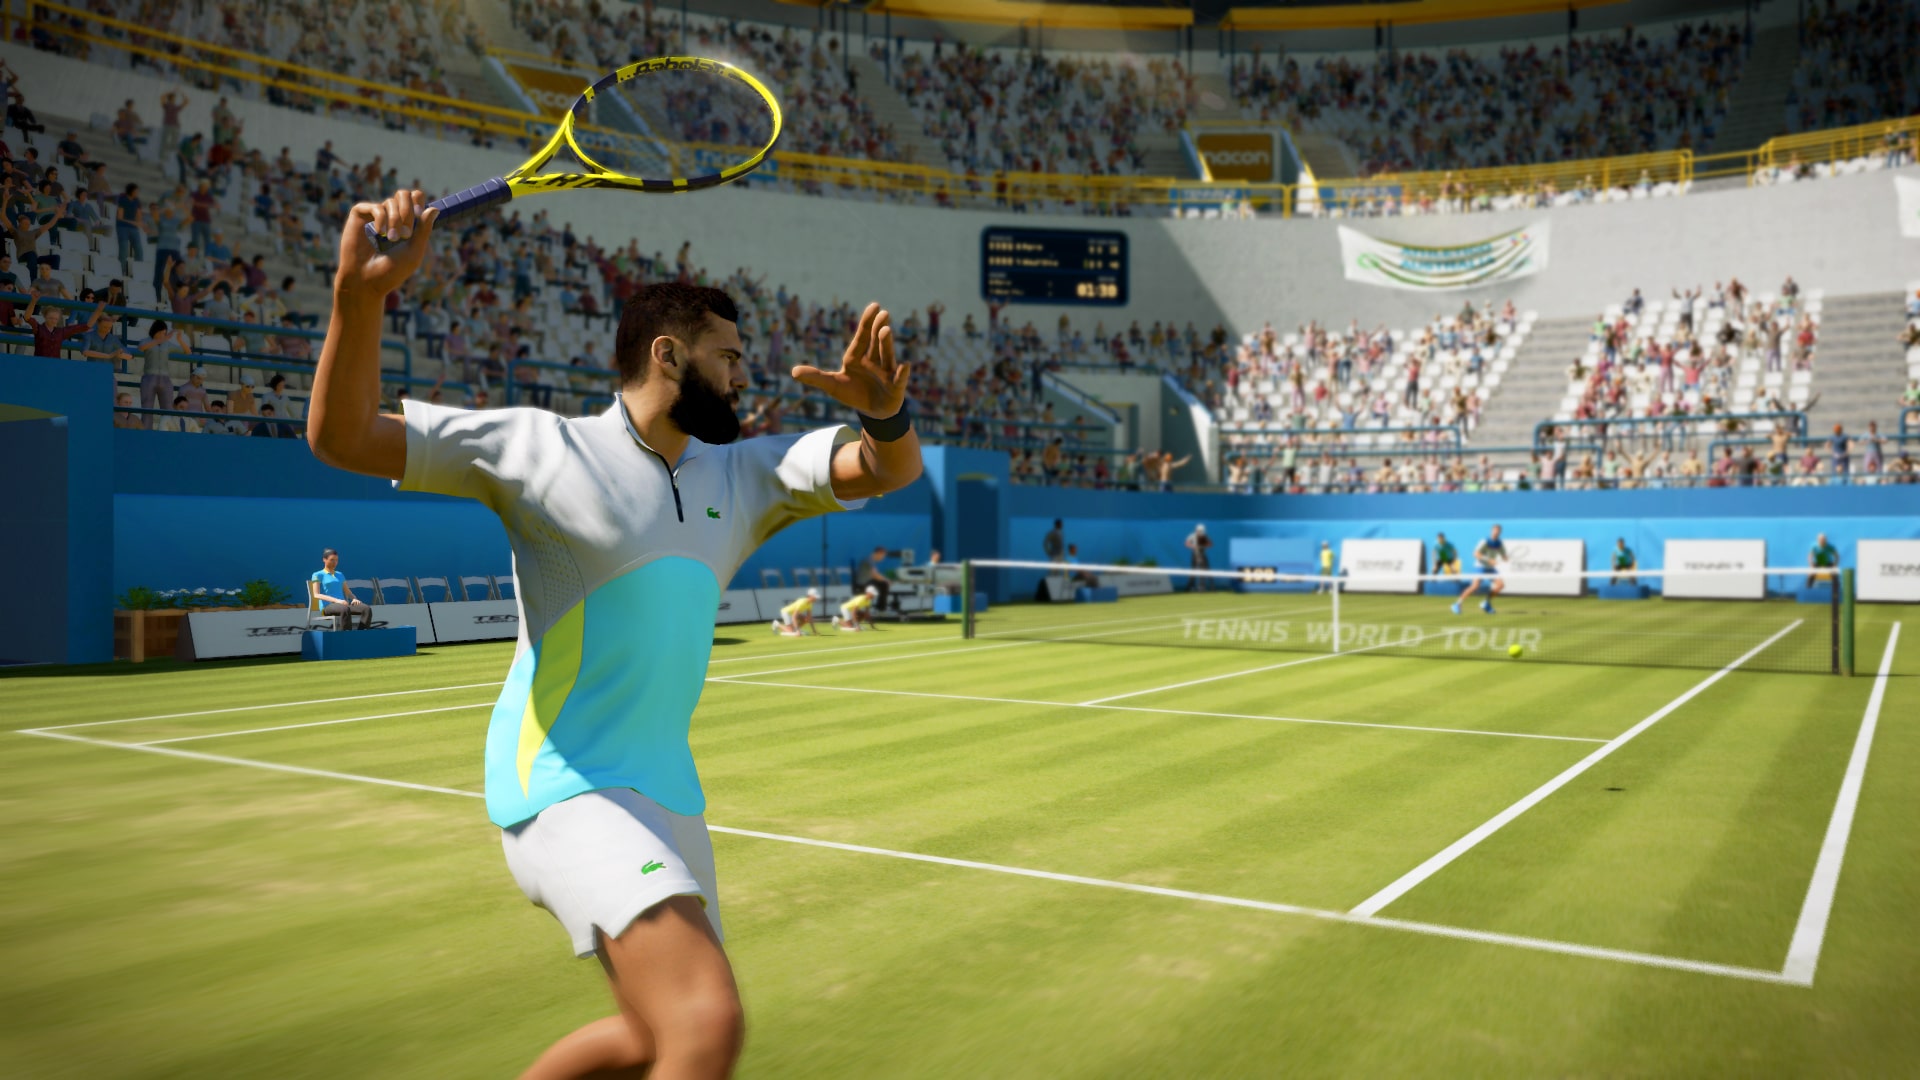 Tennis World Tour 2: Complete Edition is now available for the next-generation consoles